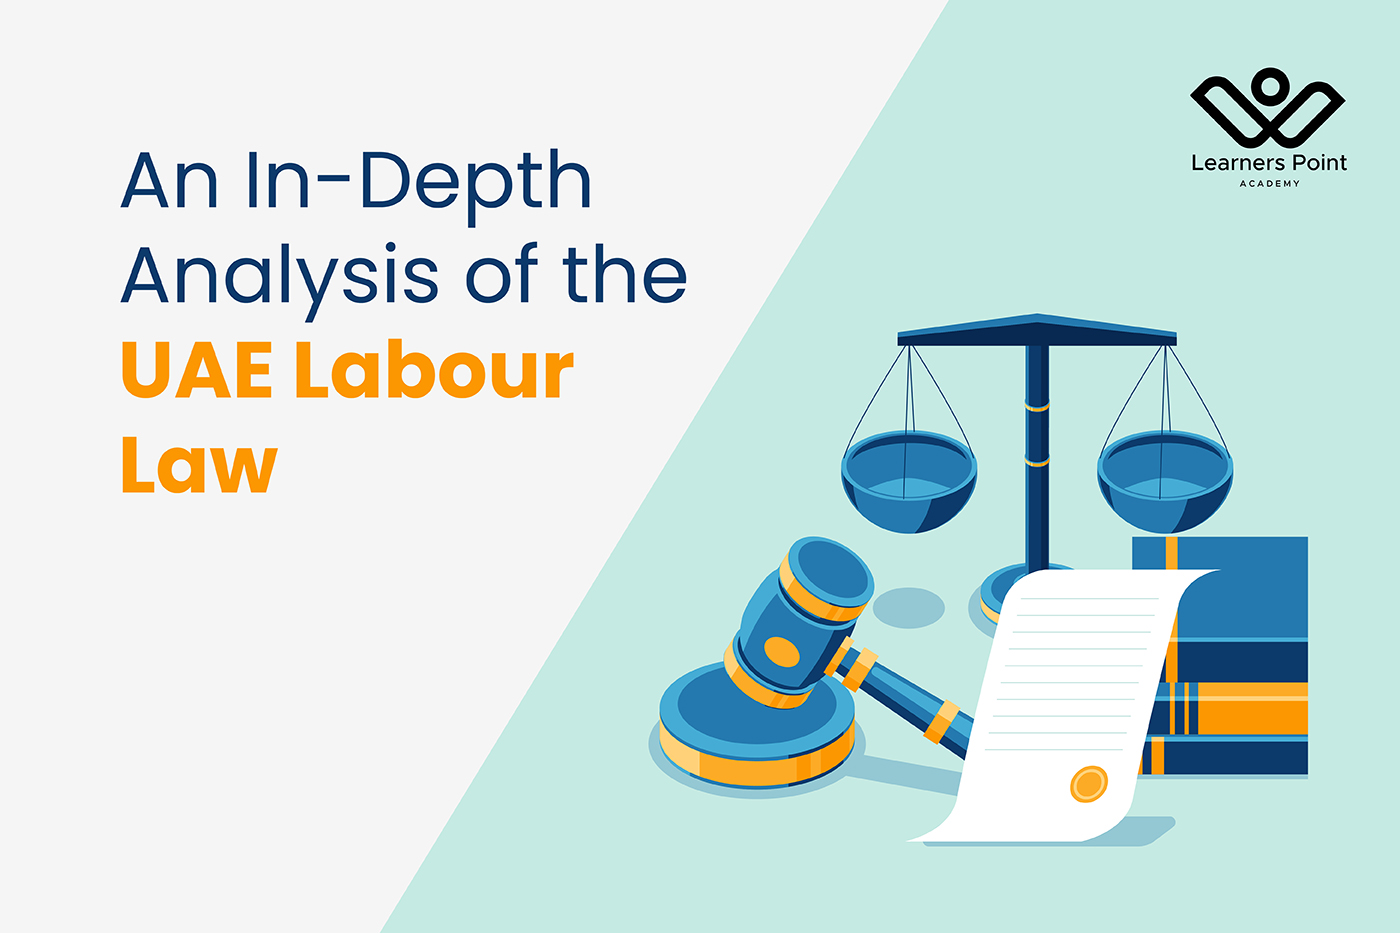 An In-Depth Analysis of the UAE Labour Law